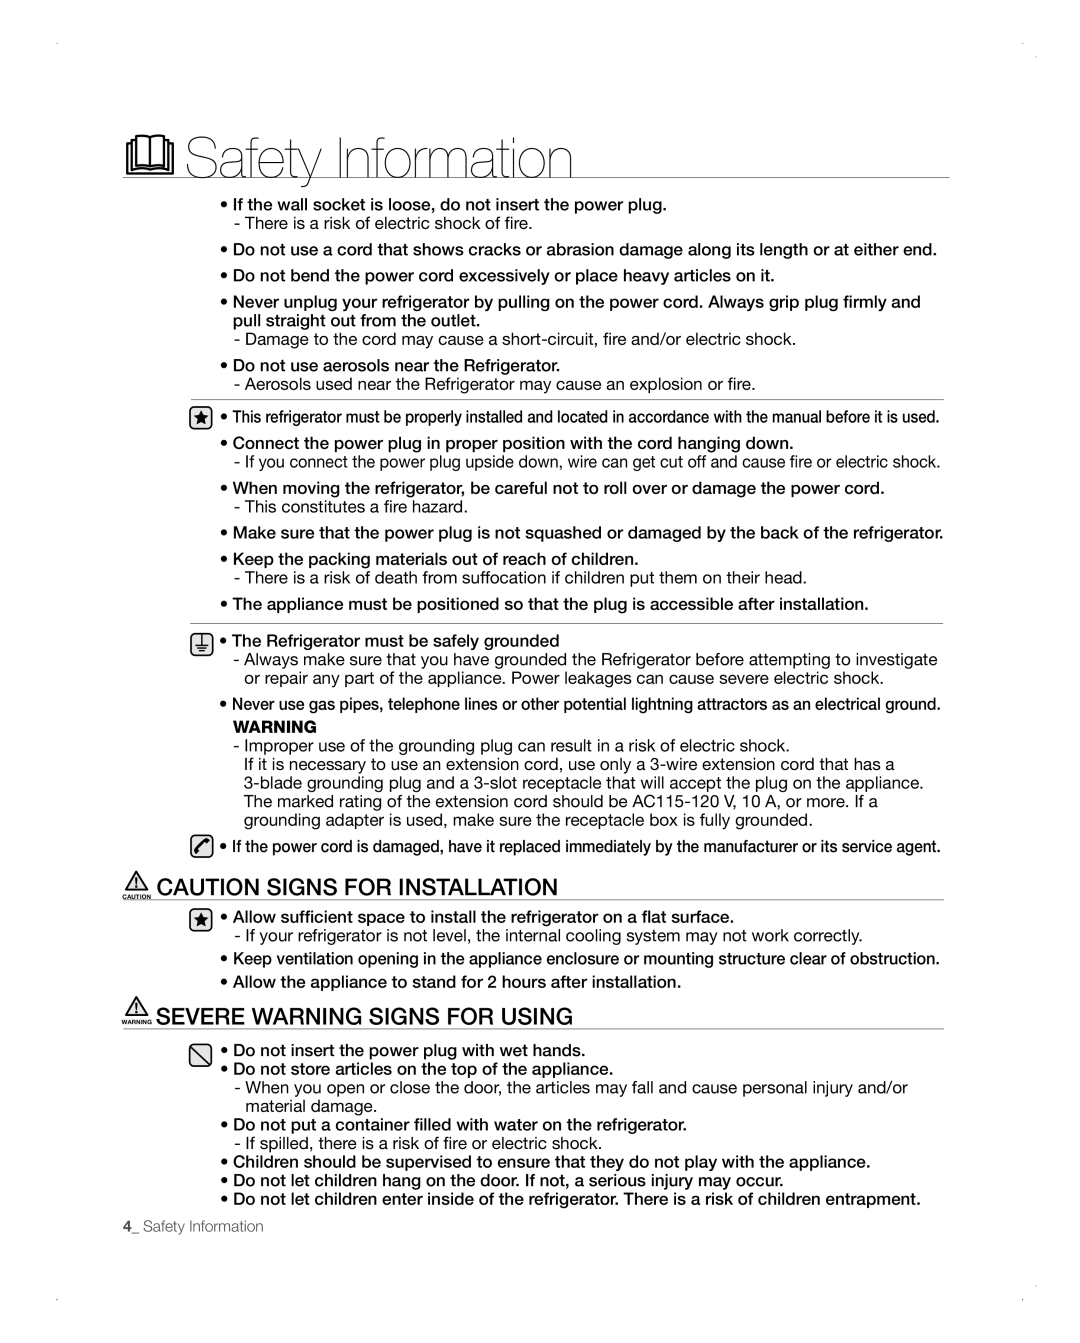 Samsung RFG298AARS CAUTION CAUTION SIGNS for INSTALLATION, WARNING SEVERE WARNING SIGNS for USING, Safety Information 